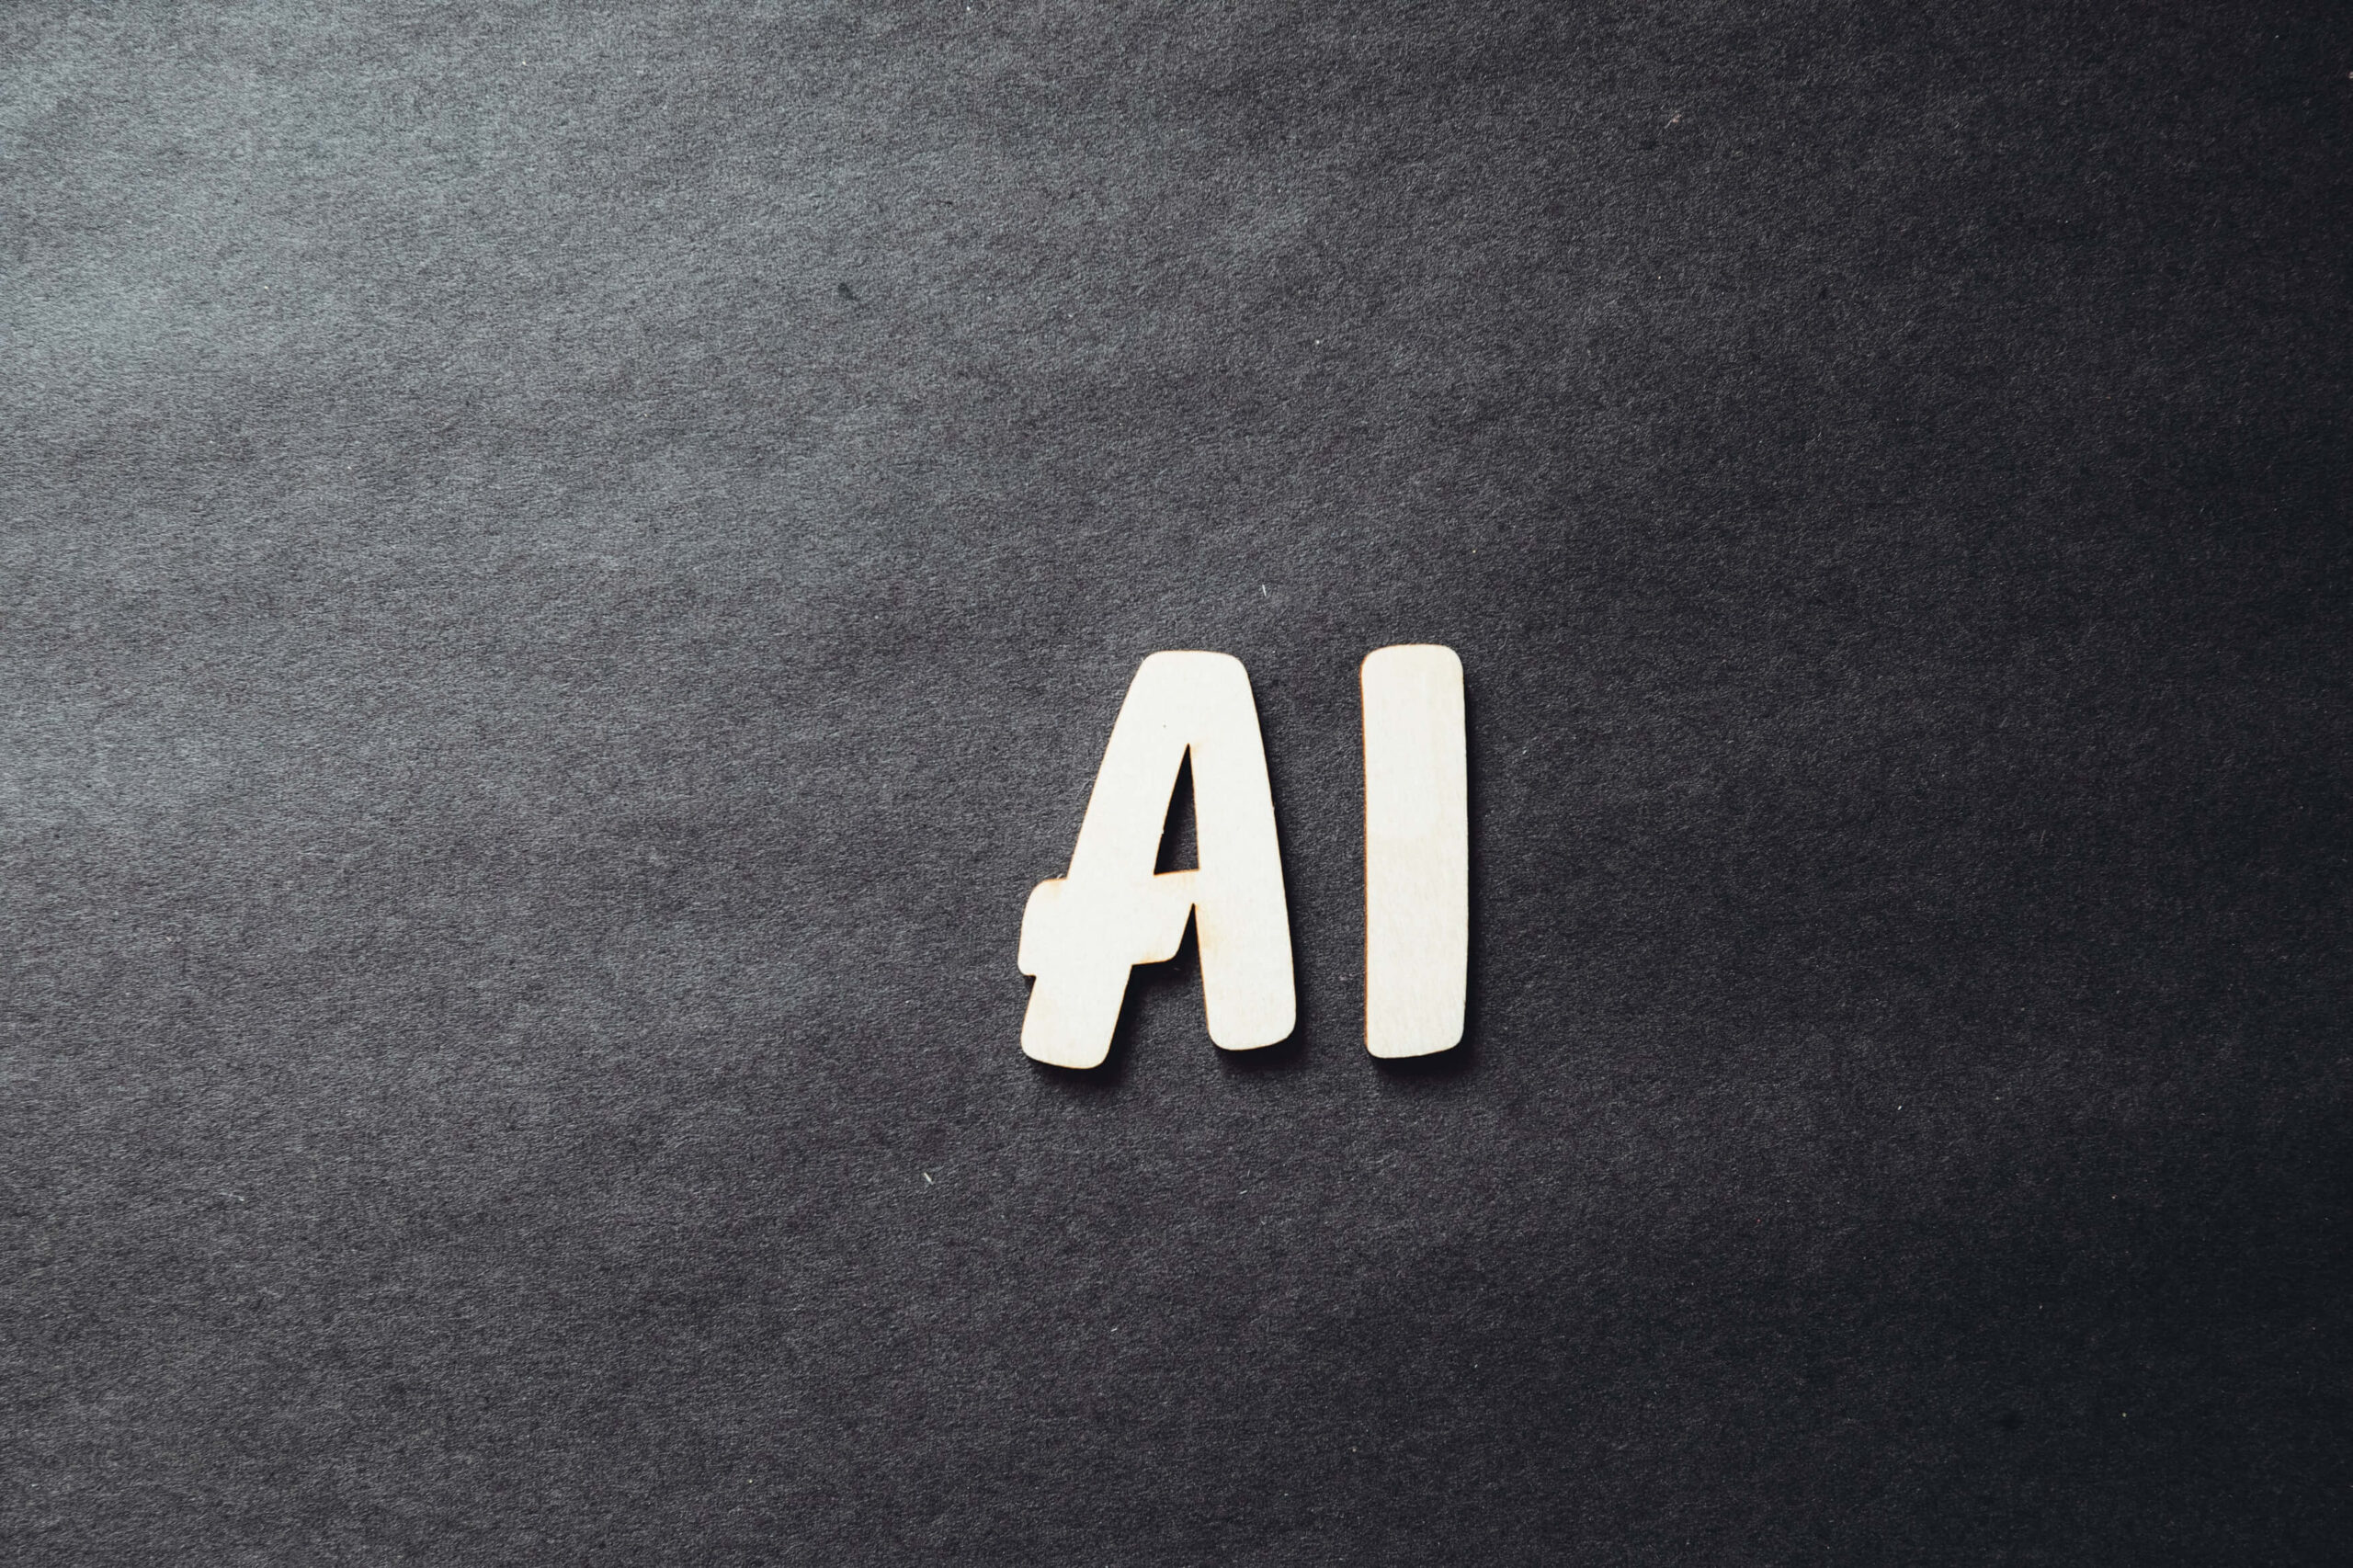 AI investment will boost global labor productivity by more than 1 percentage point per year within a decade